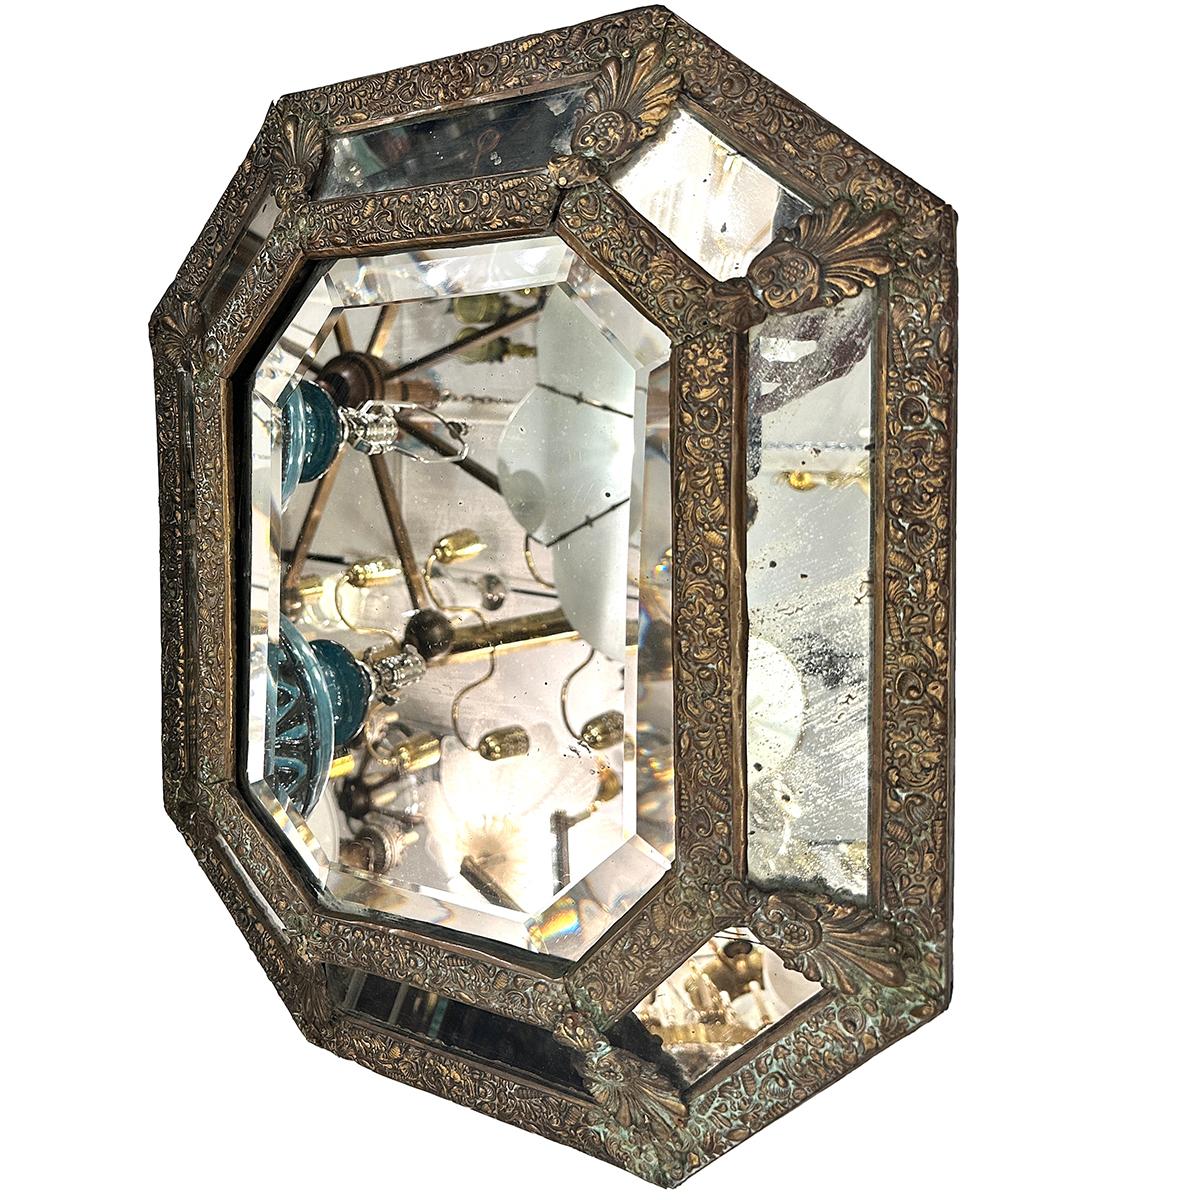 A circa 1960's French repoussé mirror with foliage motif.

Measurements:
Height: 21